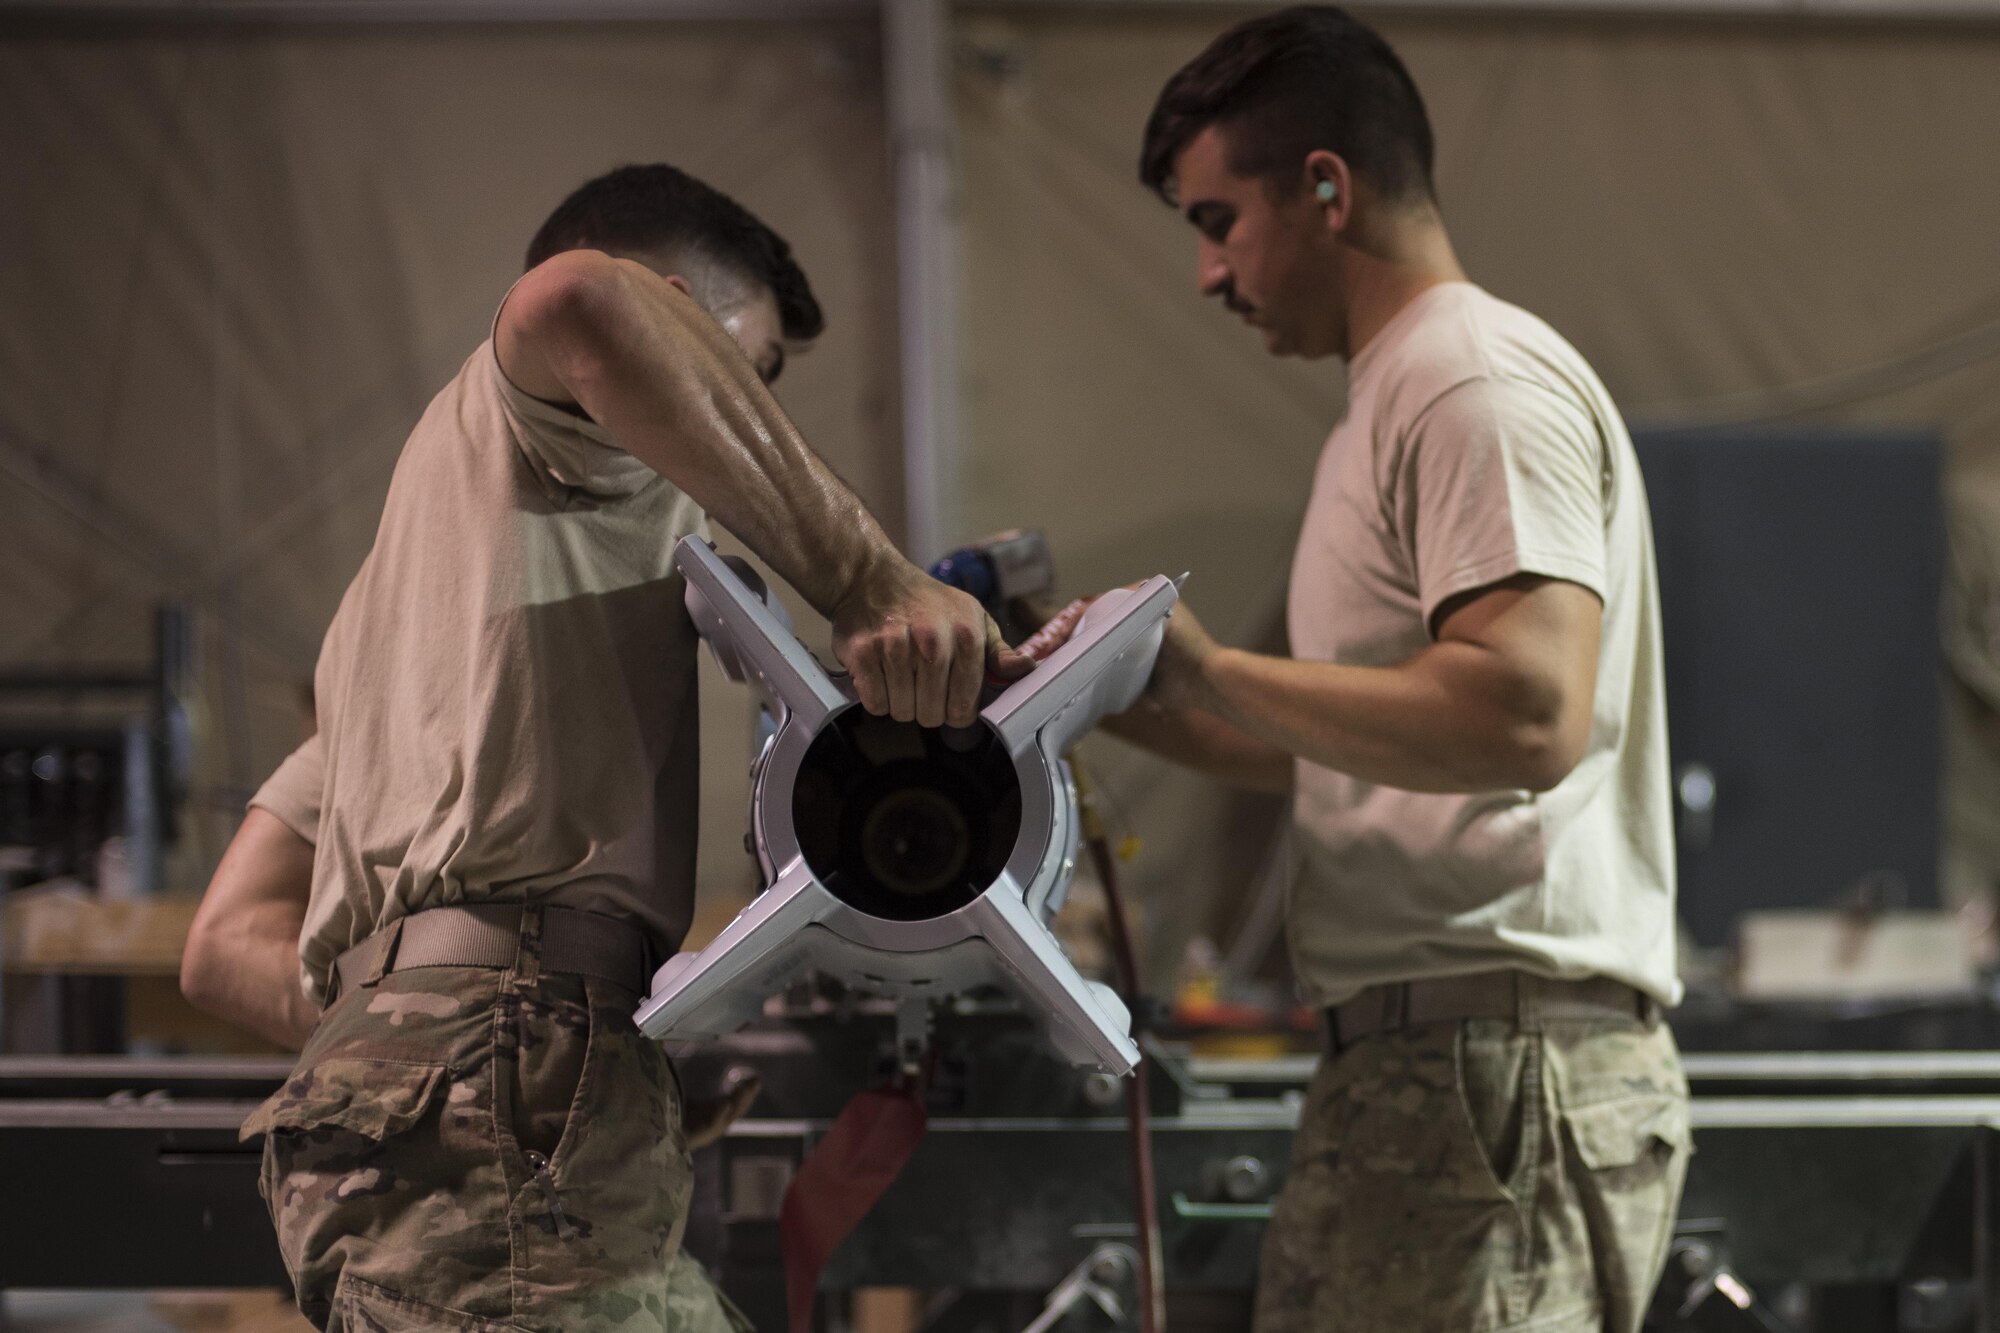 Staff Sgt. Noah Dankocsik, left, and Senior Airman Stefan Fleury, 332nd Expeditionary Maintenance Squadron maintenance crewmembers, install a tail kit to a GBU-12 laser-guided bomb July 7, 2017, in Southwest Asia. The 332nd EMXS must build a variety of bombs to combat the wide range of threats throughout the area of operation. (U.S. Air Force photo/Senior Airman Damon Kasberg)